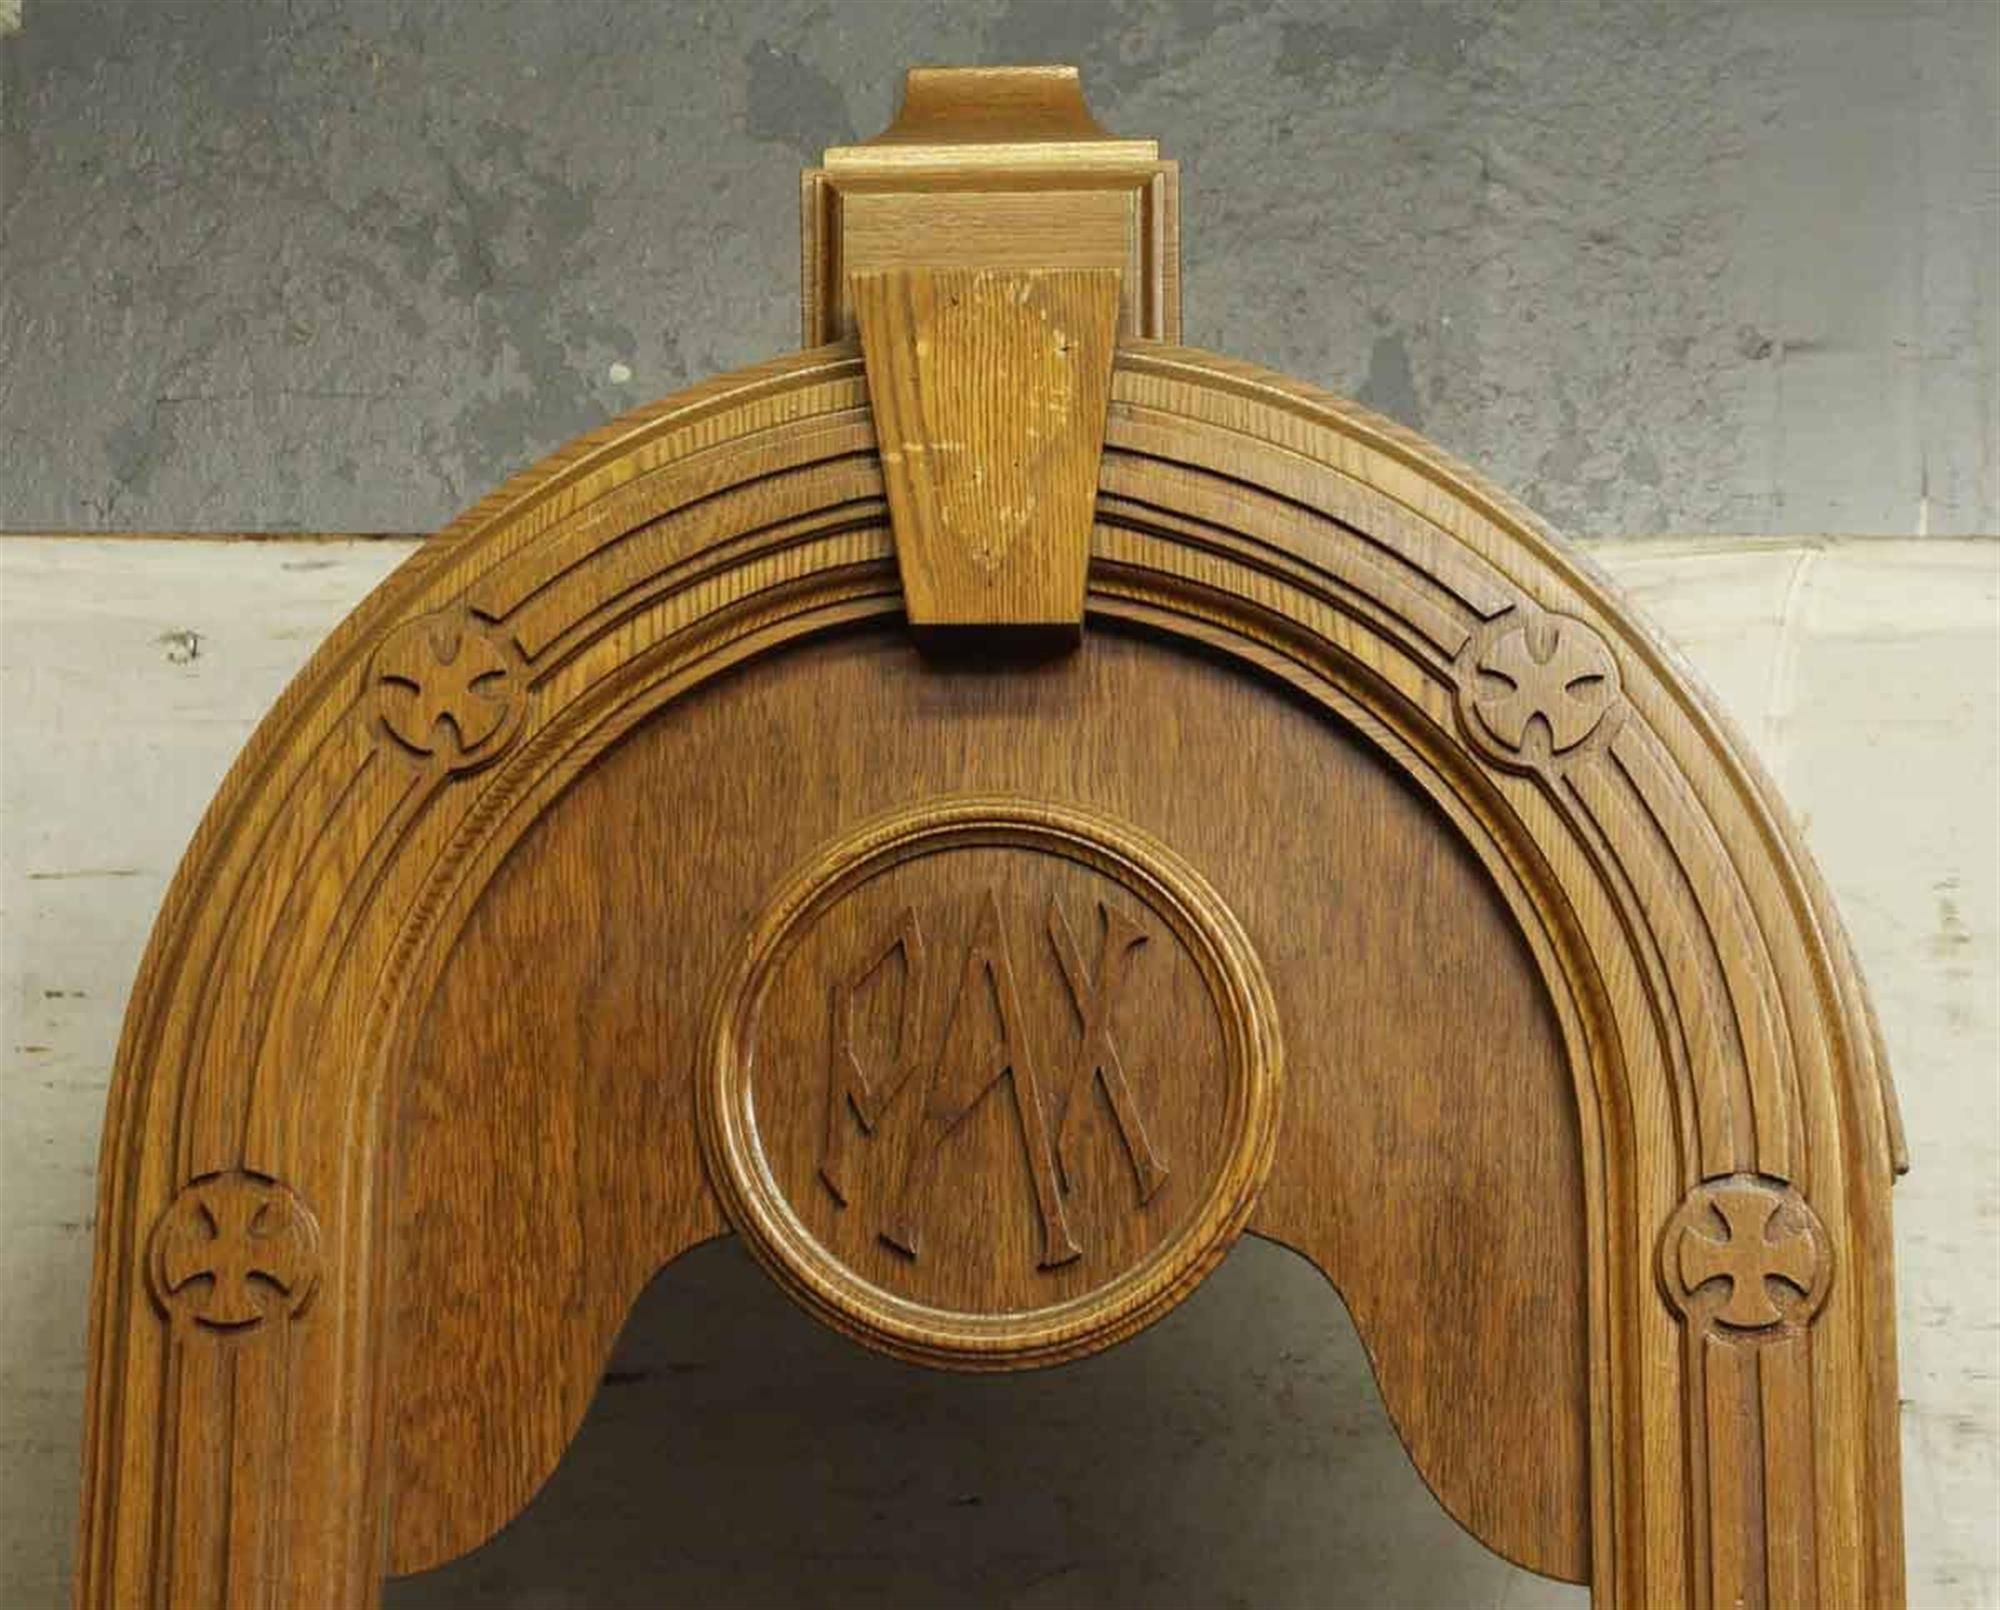 1940s large oak confessional door with PAX monogram. This can be seen at our 400 Gilligan St location in Scranton, PA.